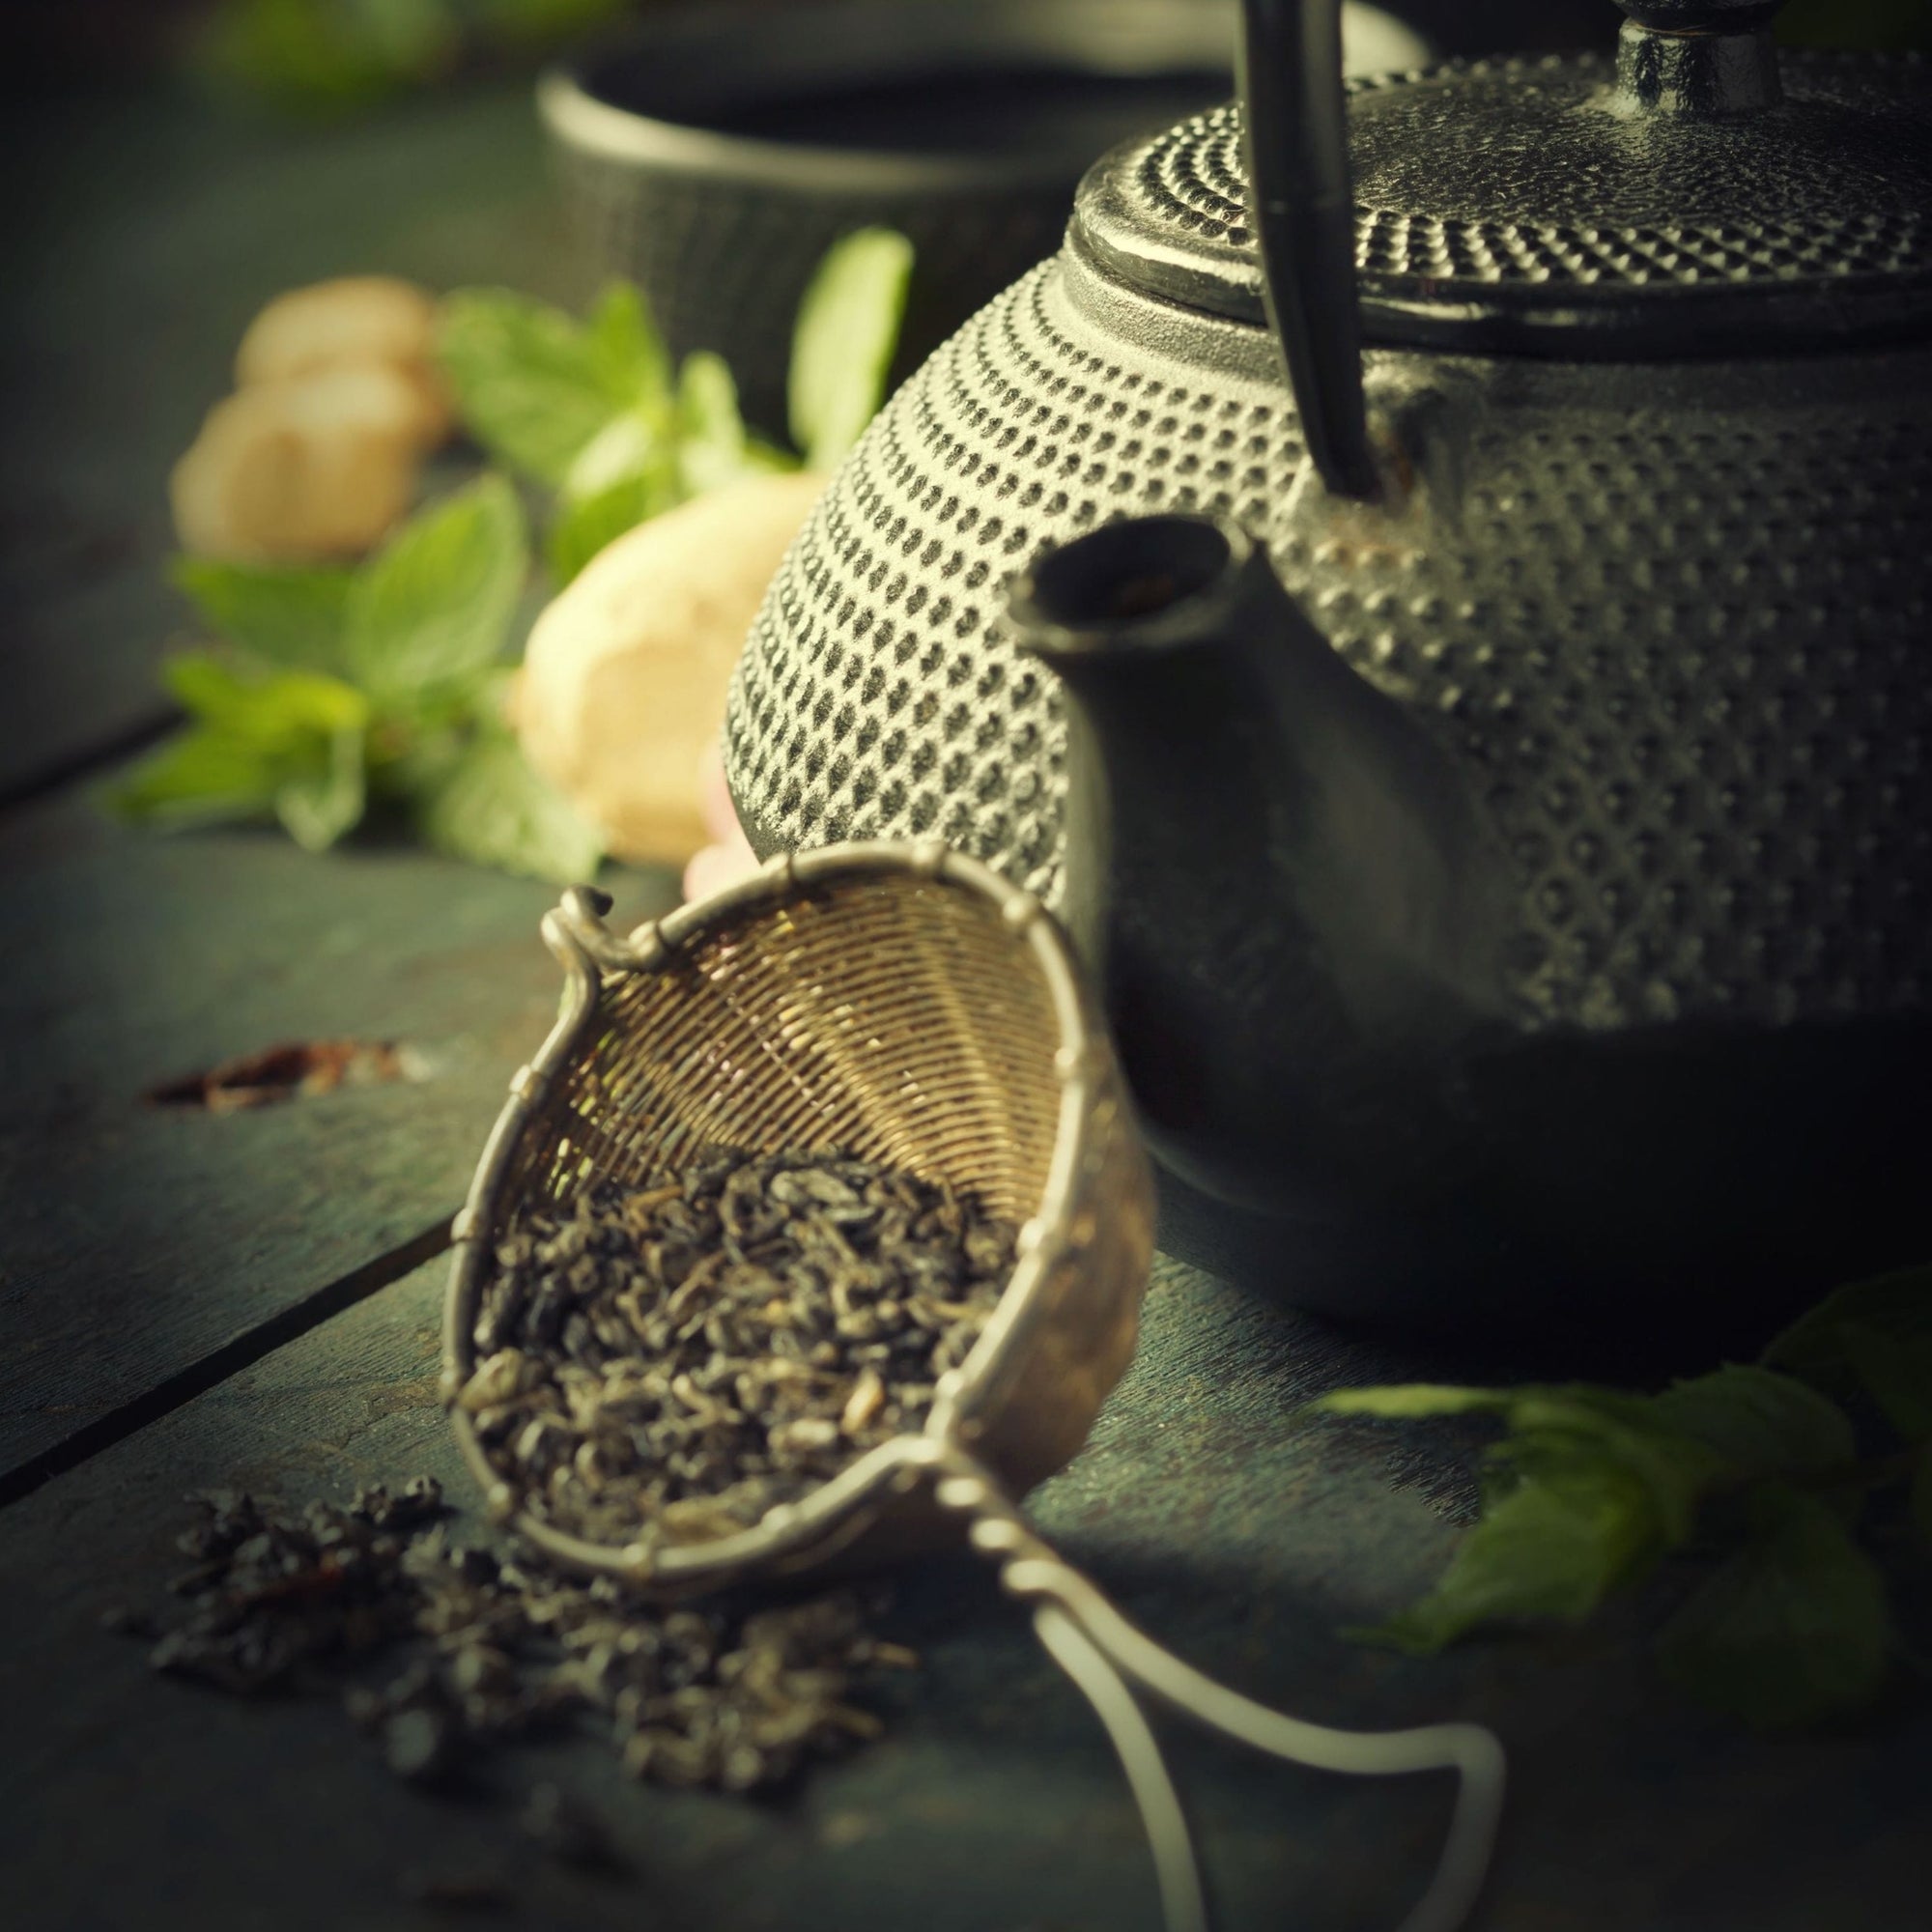 A close-up of a textured black teapot beside a tea strainer filled with loose Gamma-Aminobutyric Acid (GABA) Oolong Tea by Magic Hour. In the background, blurred elements include mint leaves and slices of ginger on a rustic wooden surface. The overall lighting is soft and warm, creating a cozy atmosphere perfect for calm nourishment.